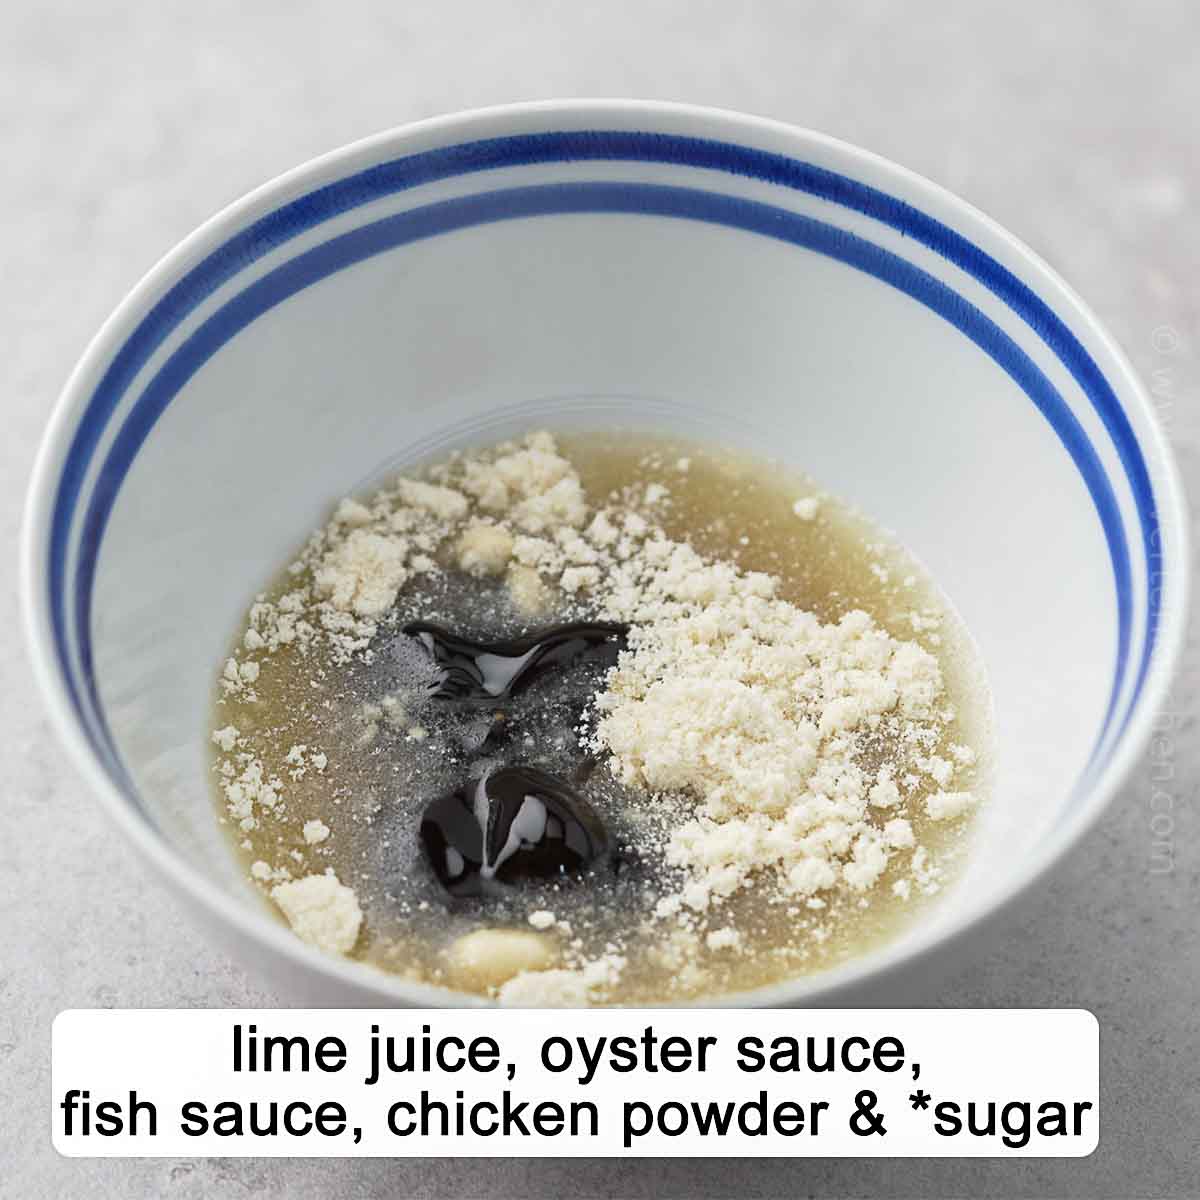 lime juice, oyster sauce, fish sauce, chicken powder and sugar.